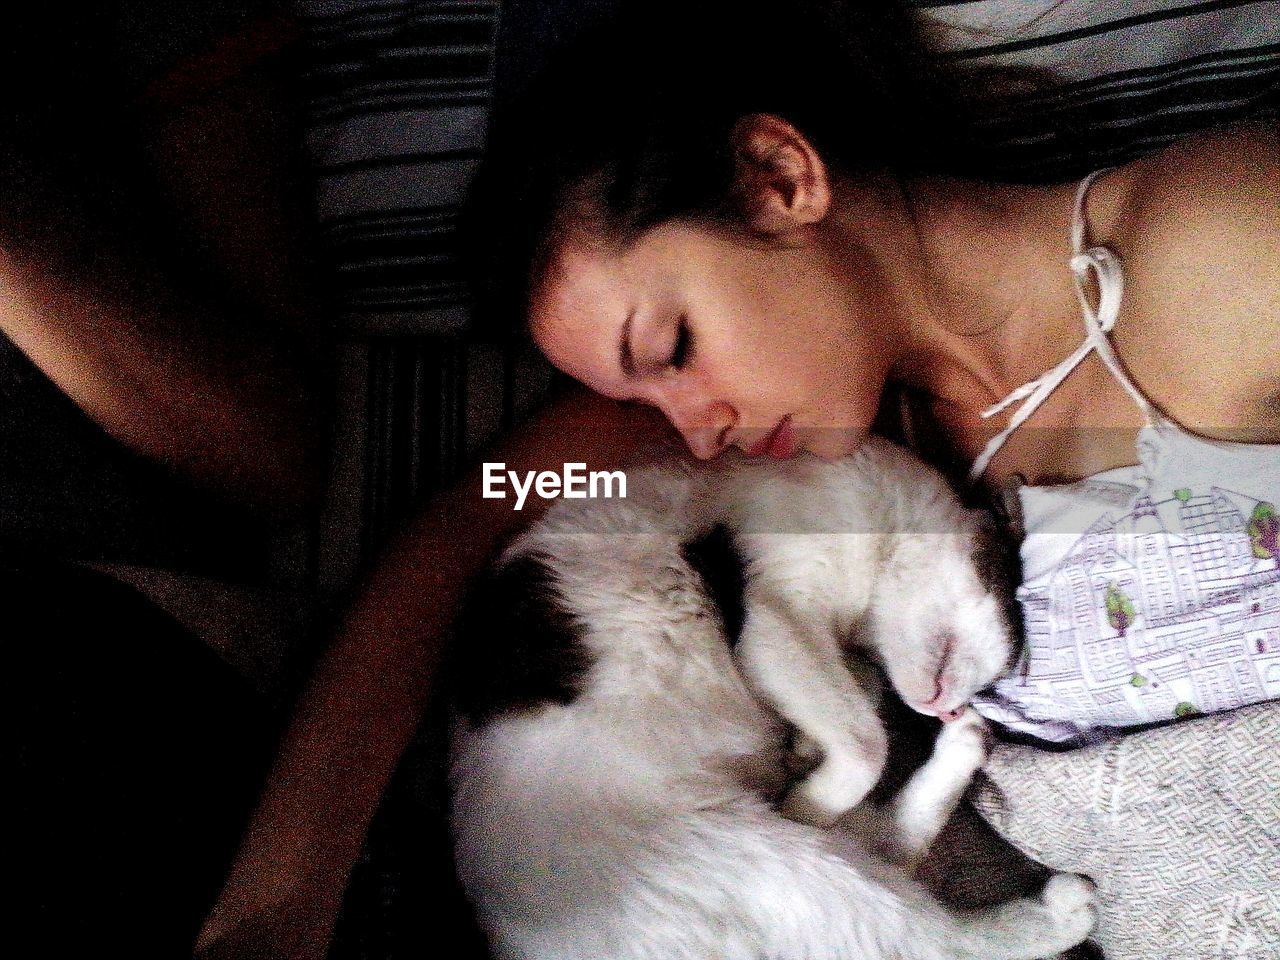 Woman with cat sleeping indoors